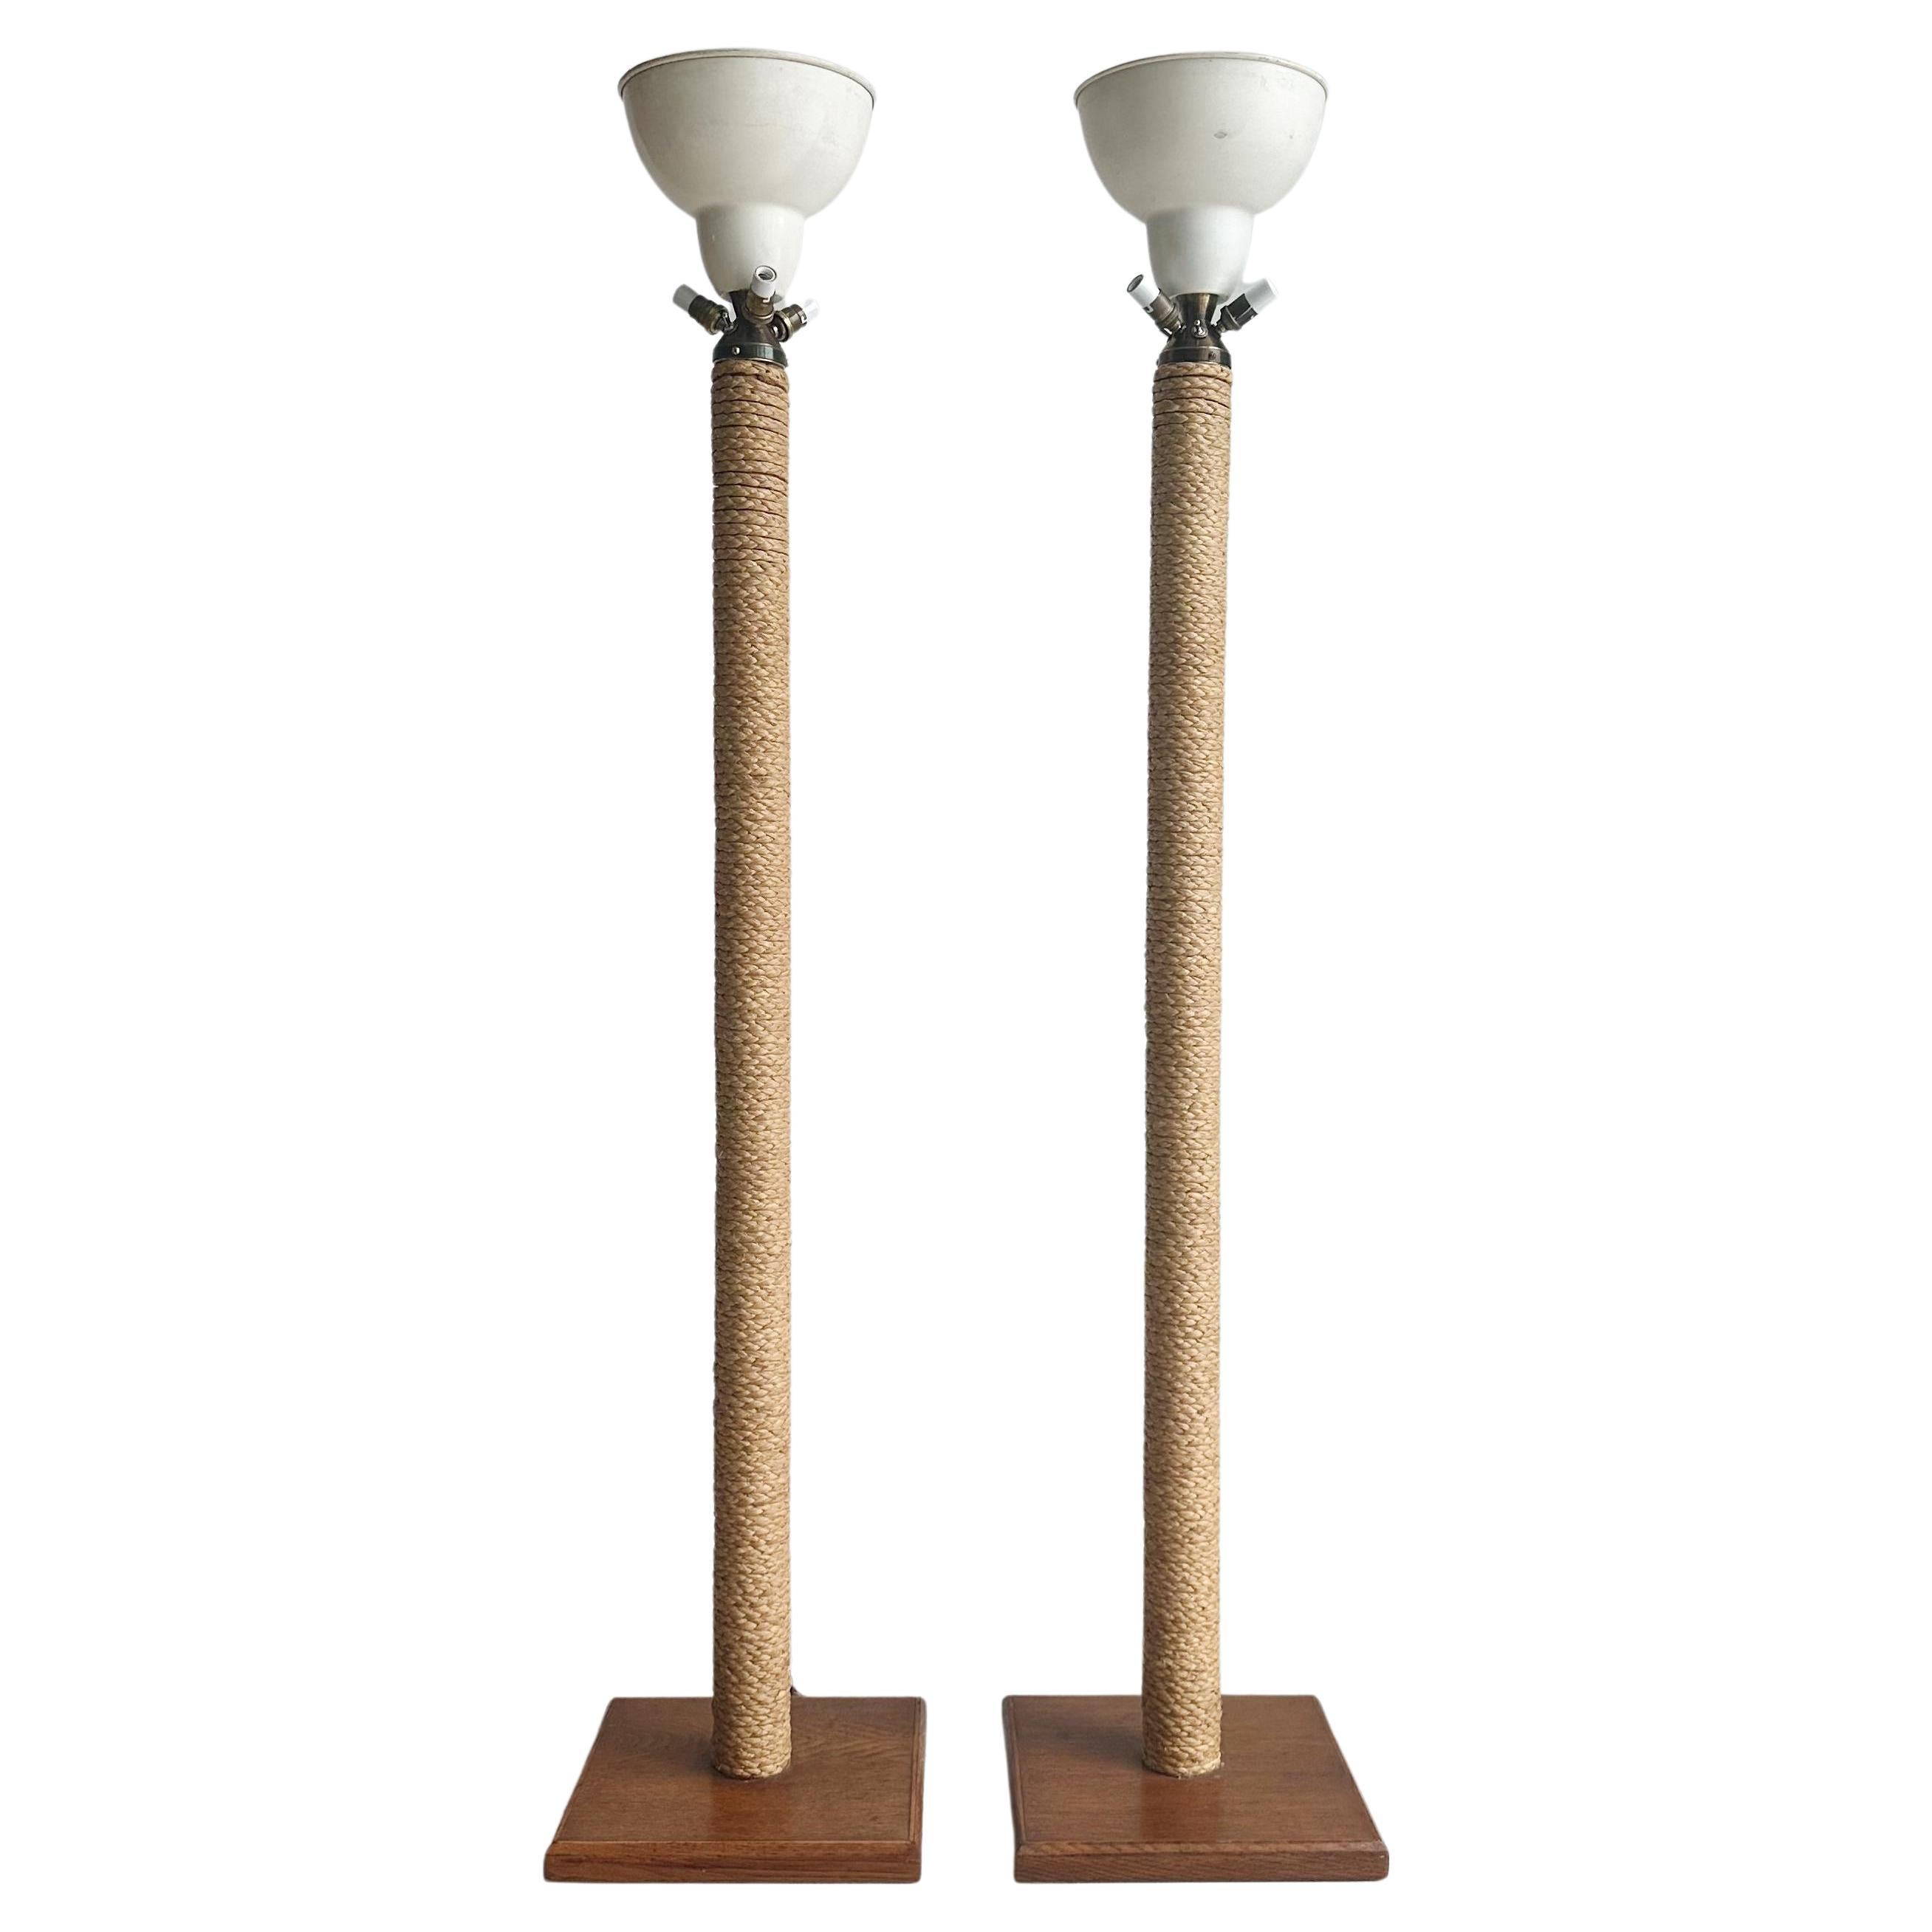 Pair of Adrien Audoux and Frida Minet Modern Rope Floor Lamps, France, 1950s For Sale